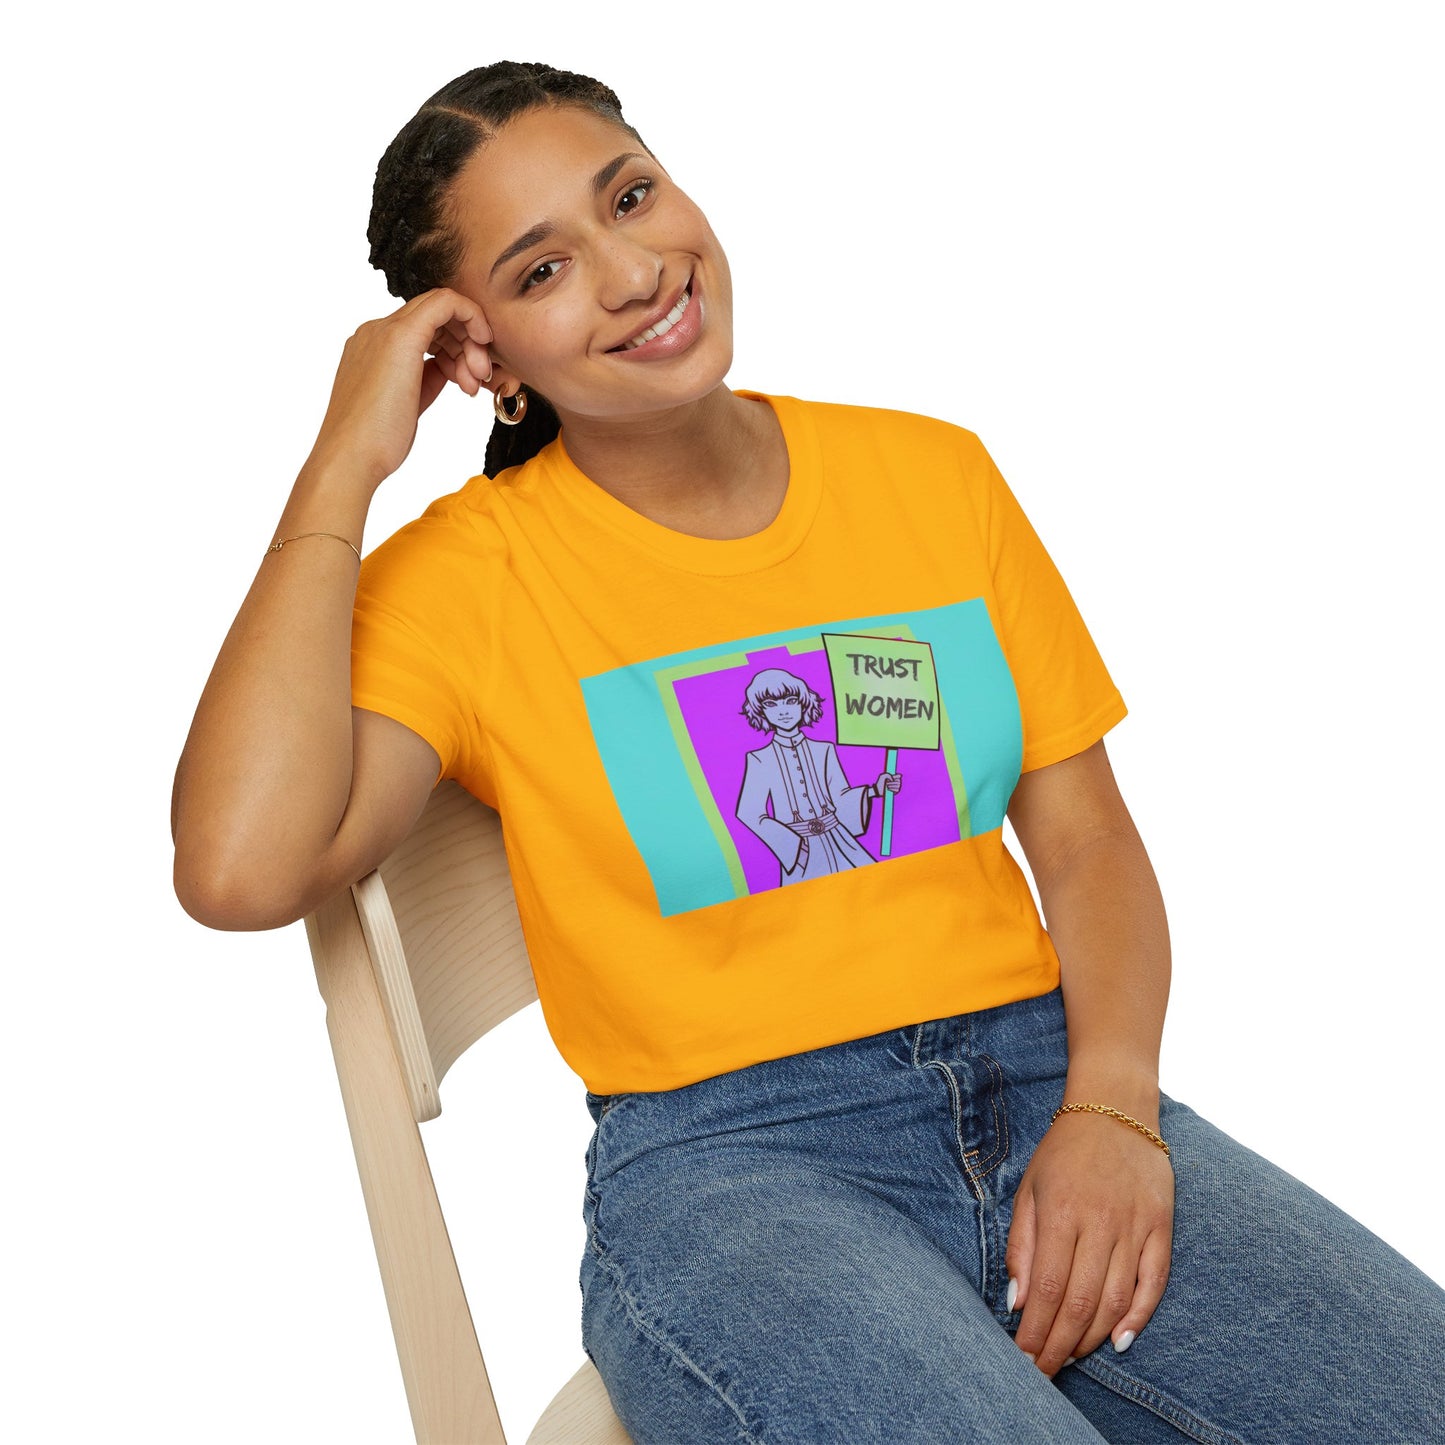 Trust Women! Bold Uncompromising Statement Soft Style t-shirt |unisex| Protest, Demand Equality Now! Activism! Look Good!